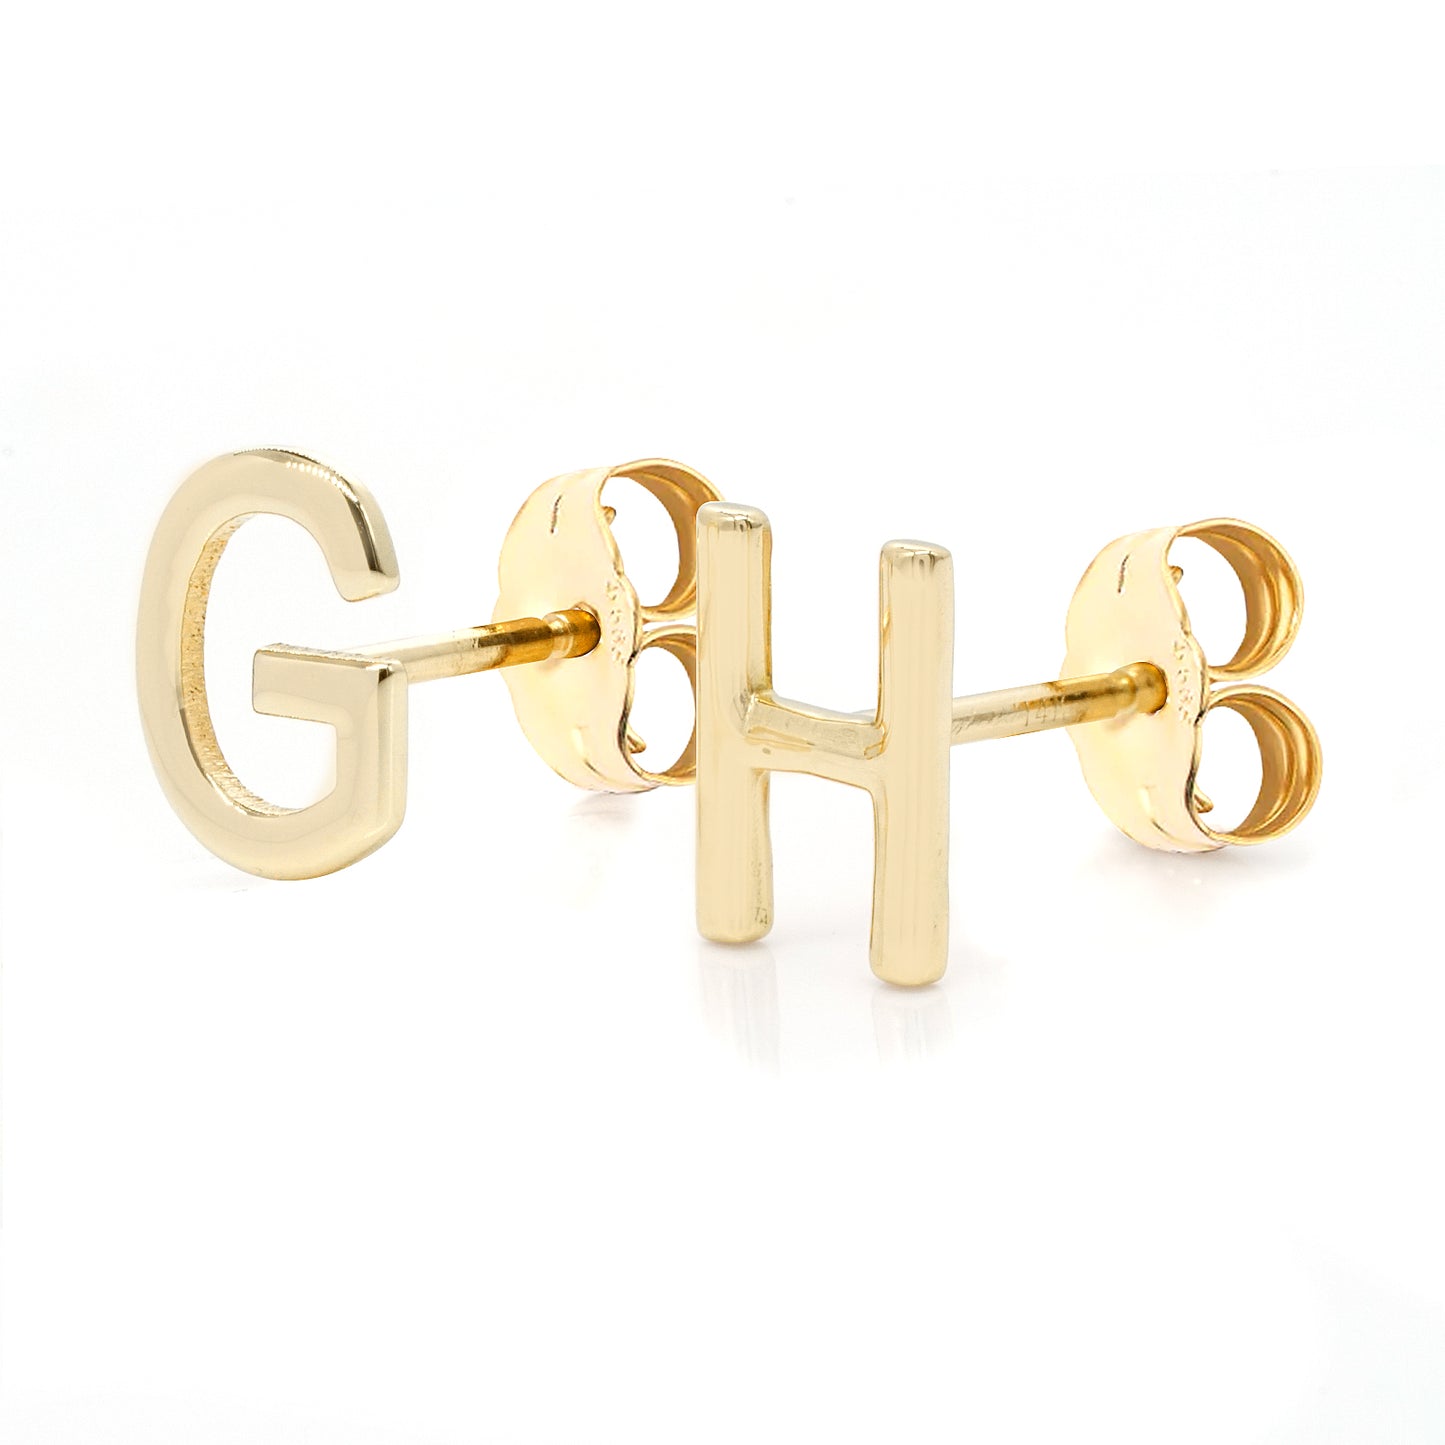 Customized Initial Stud Earrings in 14K Solid Gold